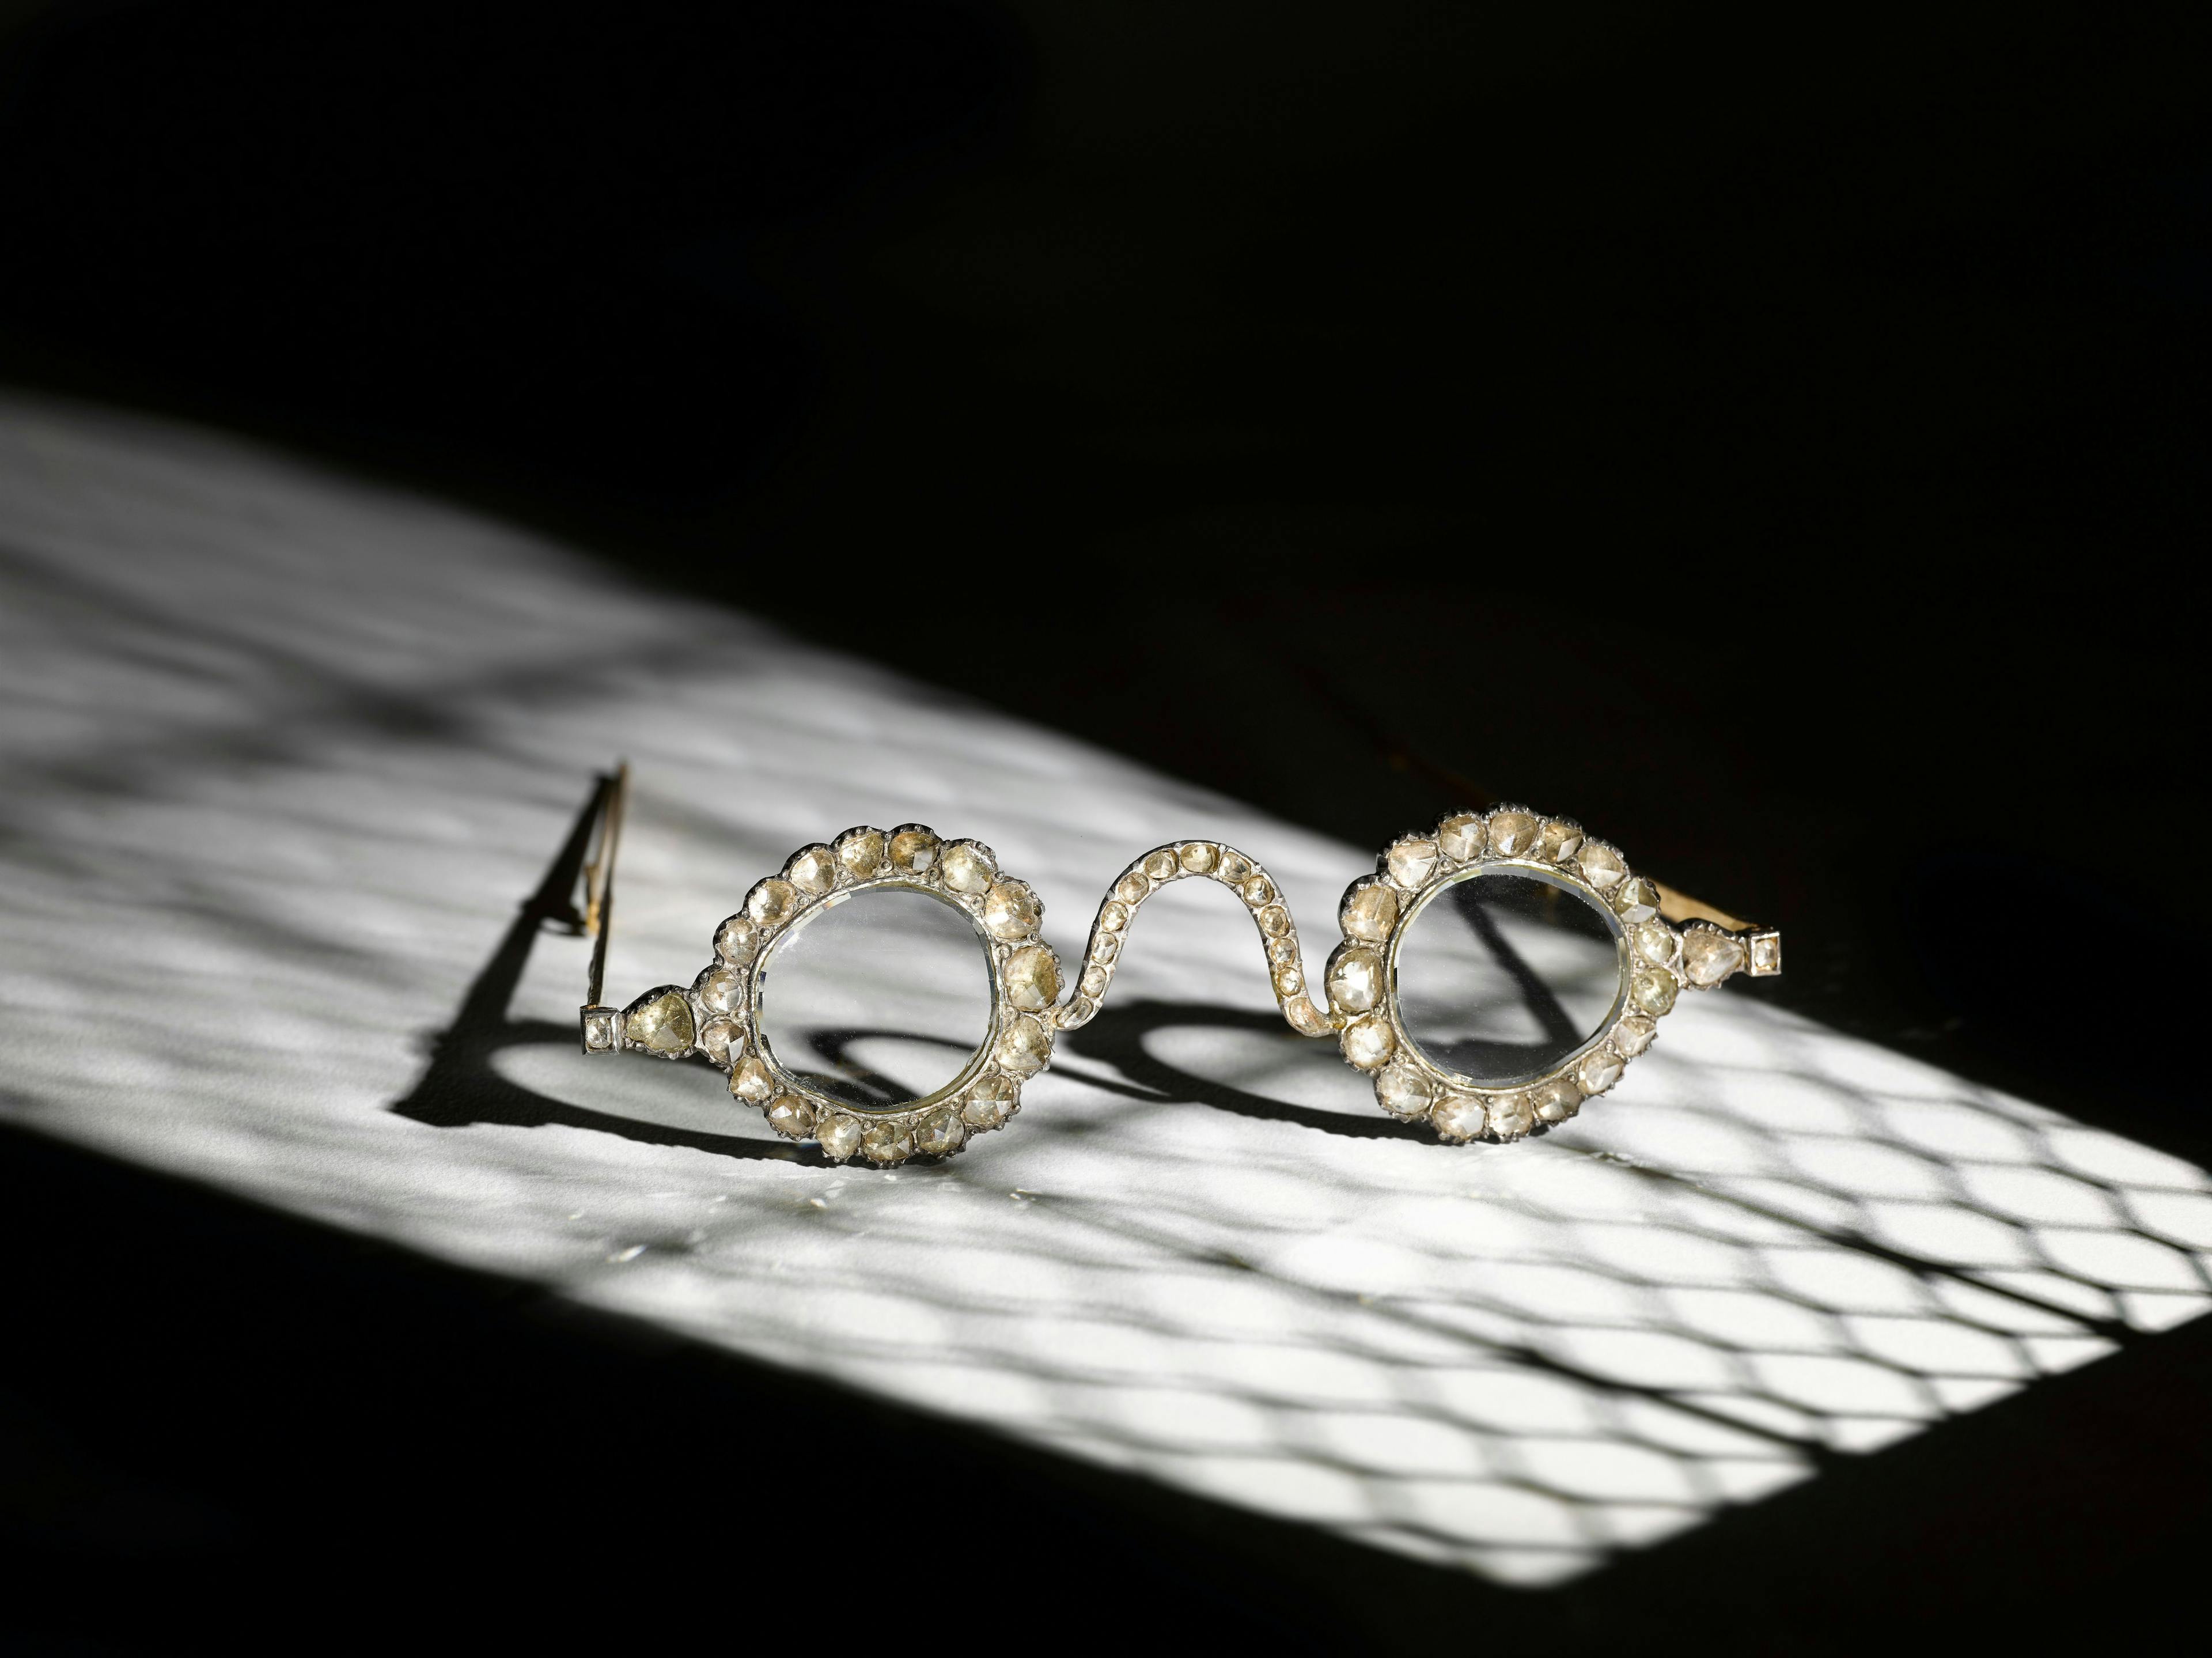 The lenses of the "Halo of Light" eyeglasses are believed to have been cut from a single 200-carat diamond. (Image courtesy of Sotheby's)